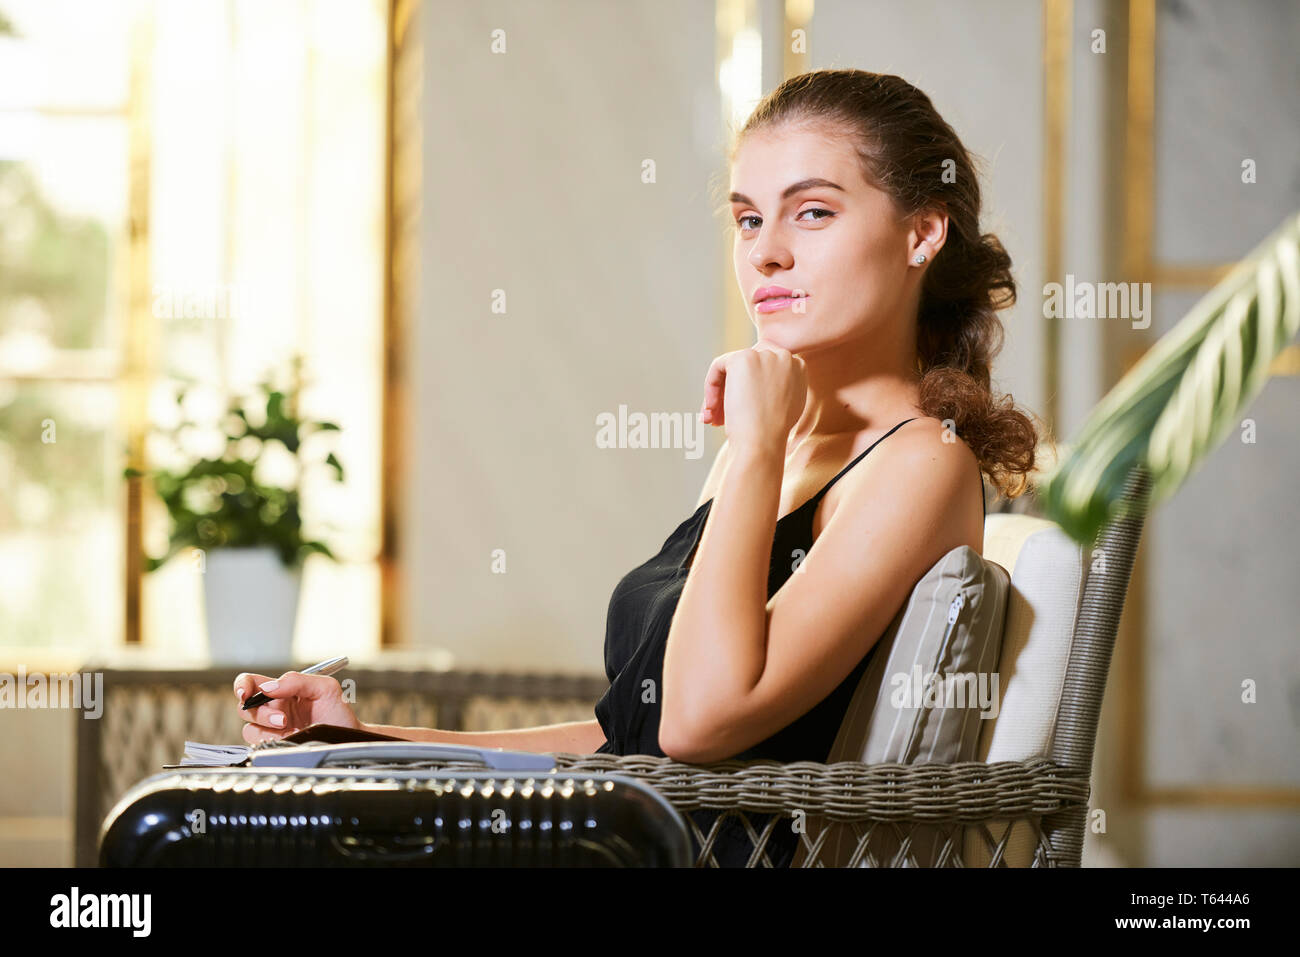 Attractive young woman in hotel lobby Stock Photo